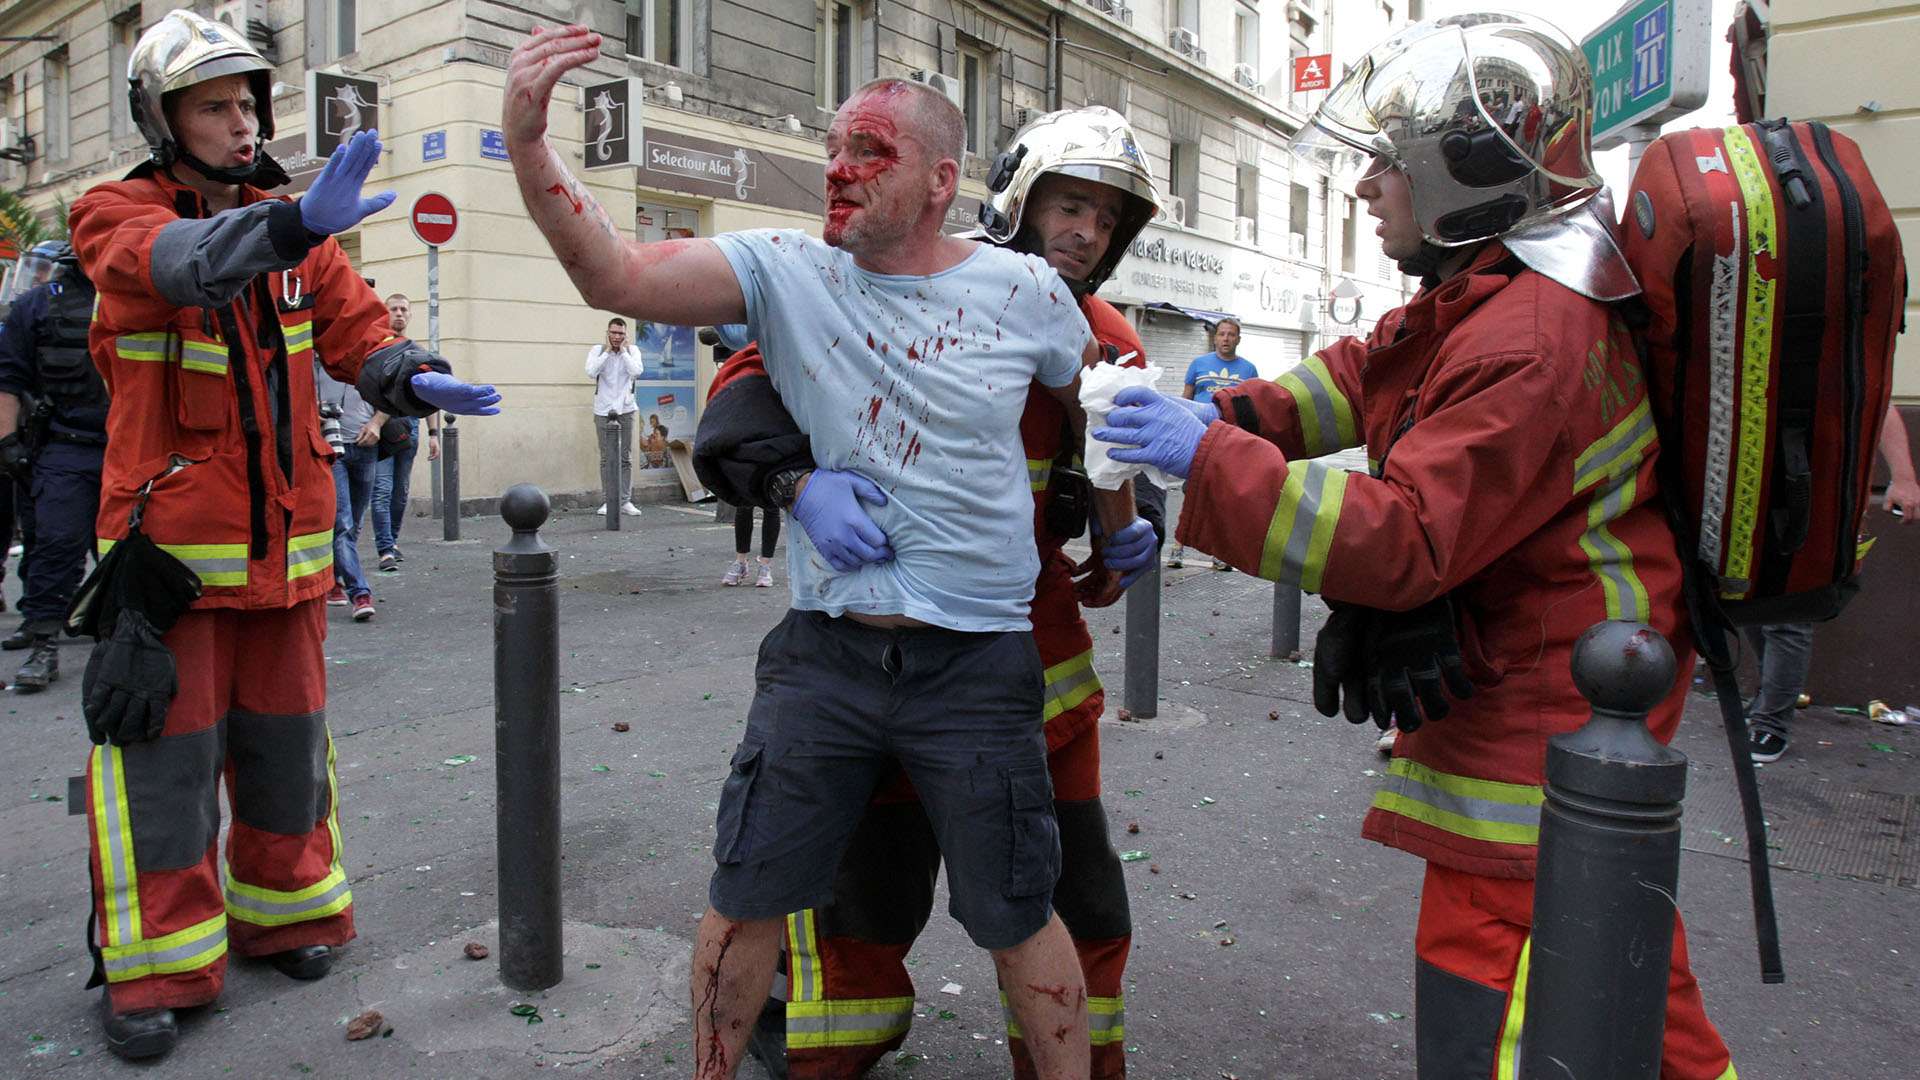 England Russia violence in Marseille